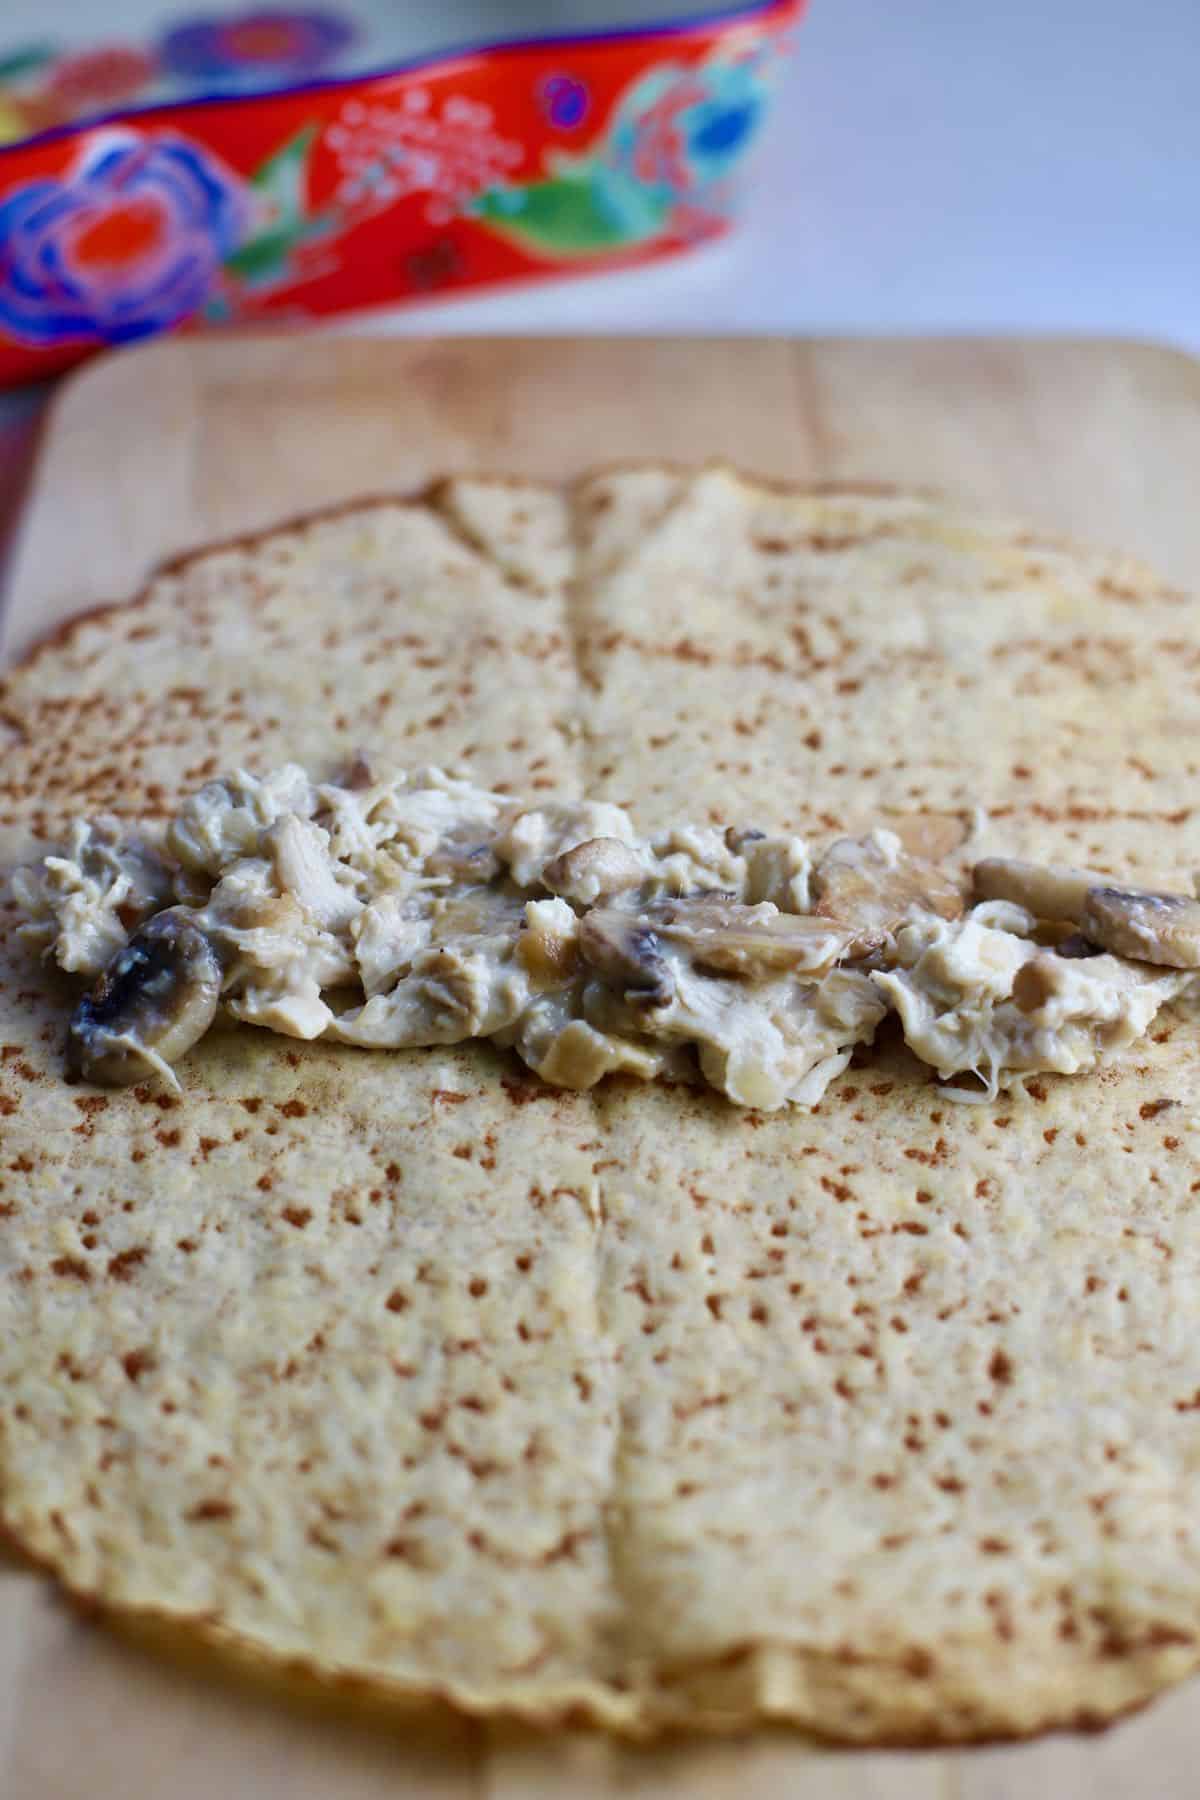 A crepe with chicken, mushrooms and mornay sauce in the middle.